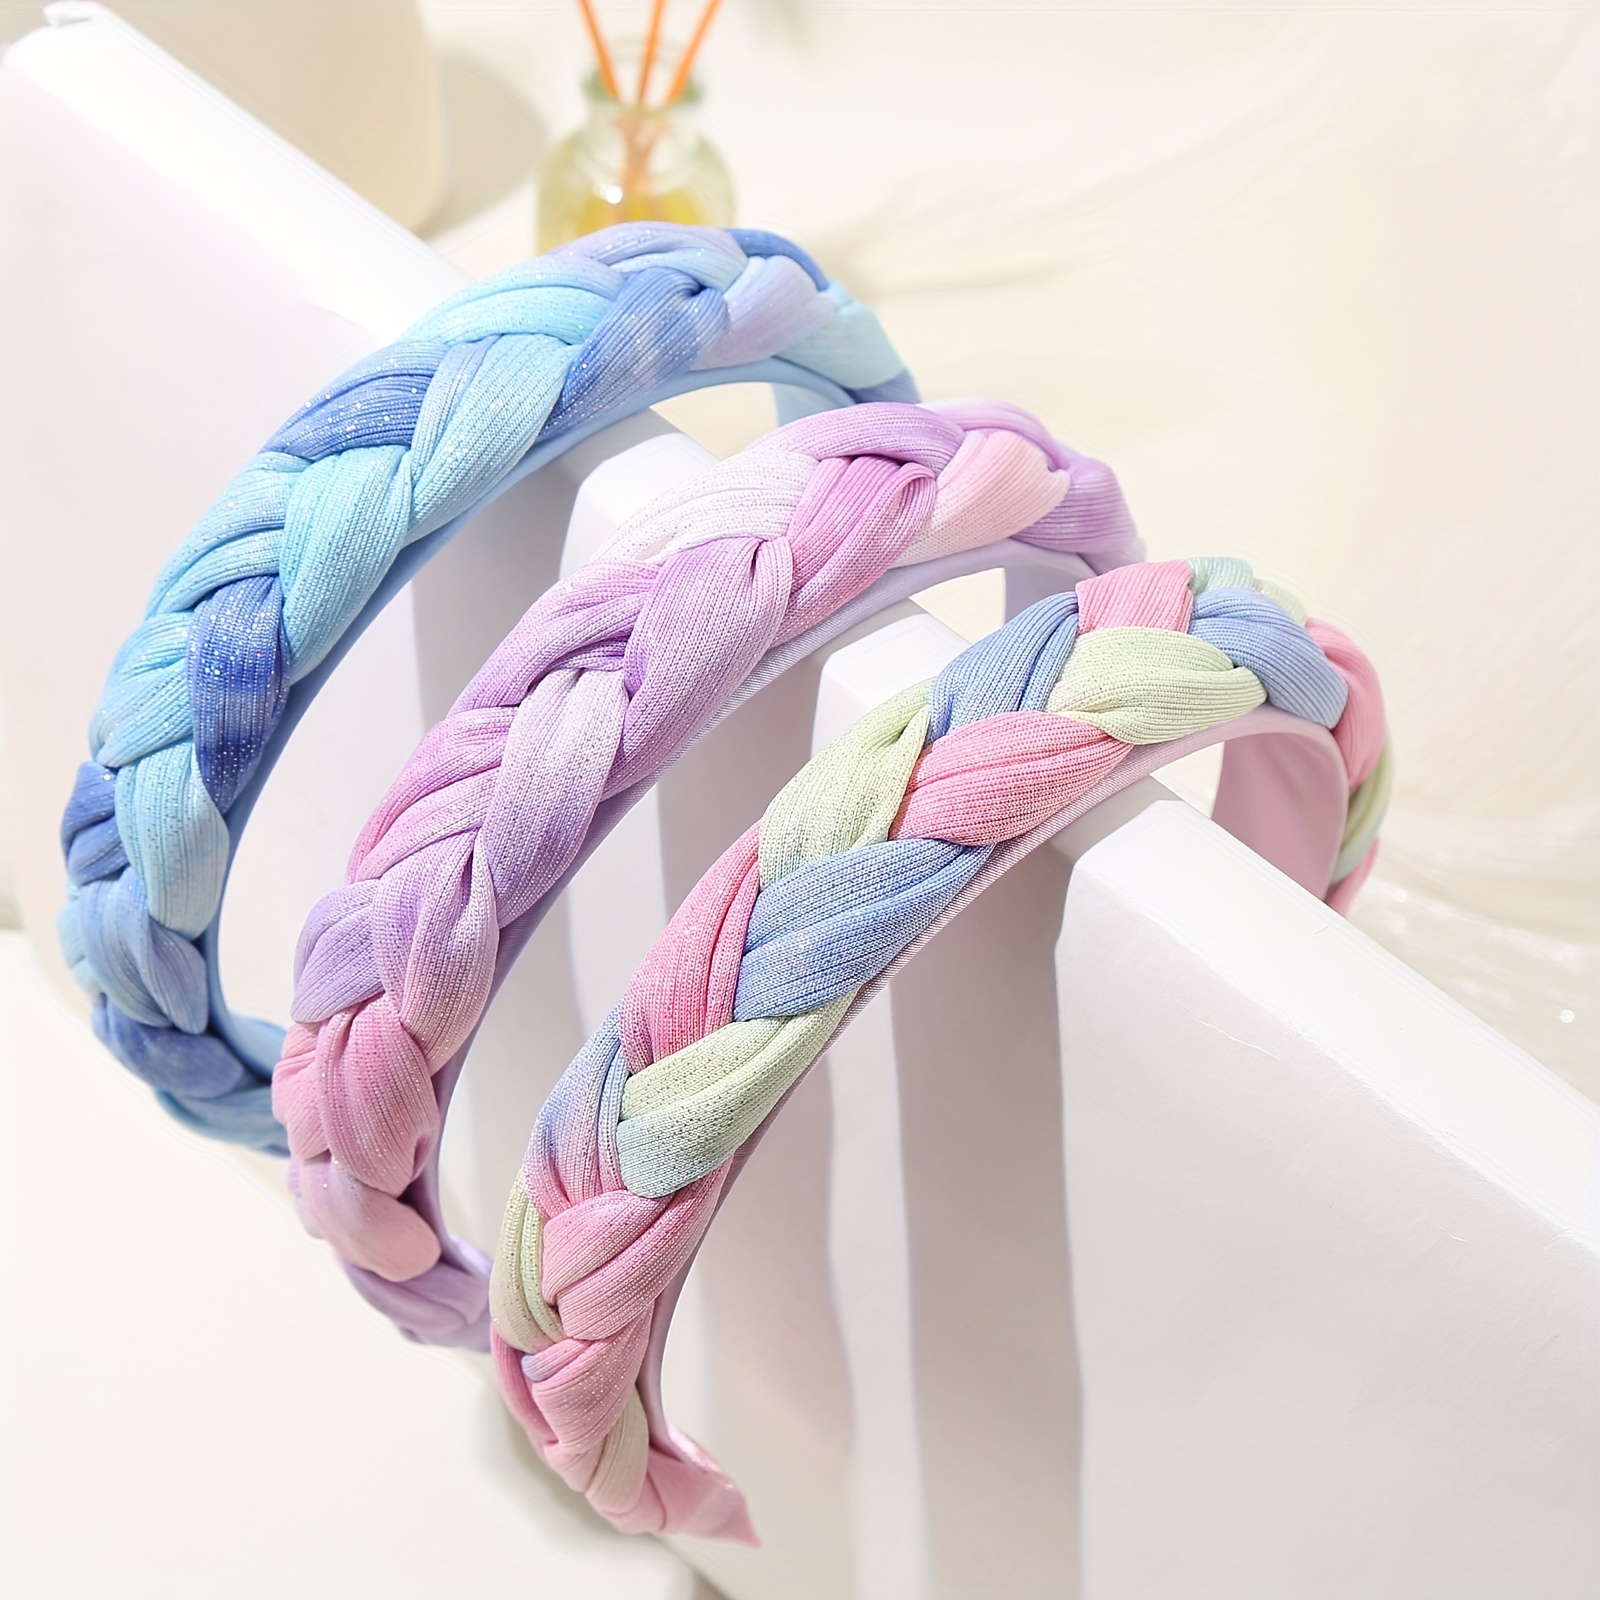 

1pc Braided Hair Headbands, Elegant Fabric Twisted Hair Hoop, High Dome Anti-slip Head Wraps For Women, Versatile Fashion Accessories For Outdoors, Face Washing, Multiple Pastel Colors